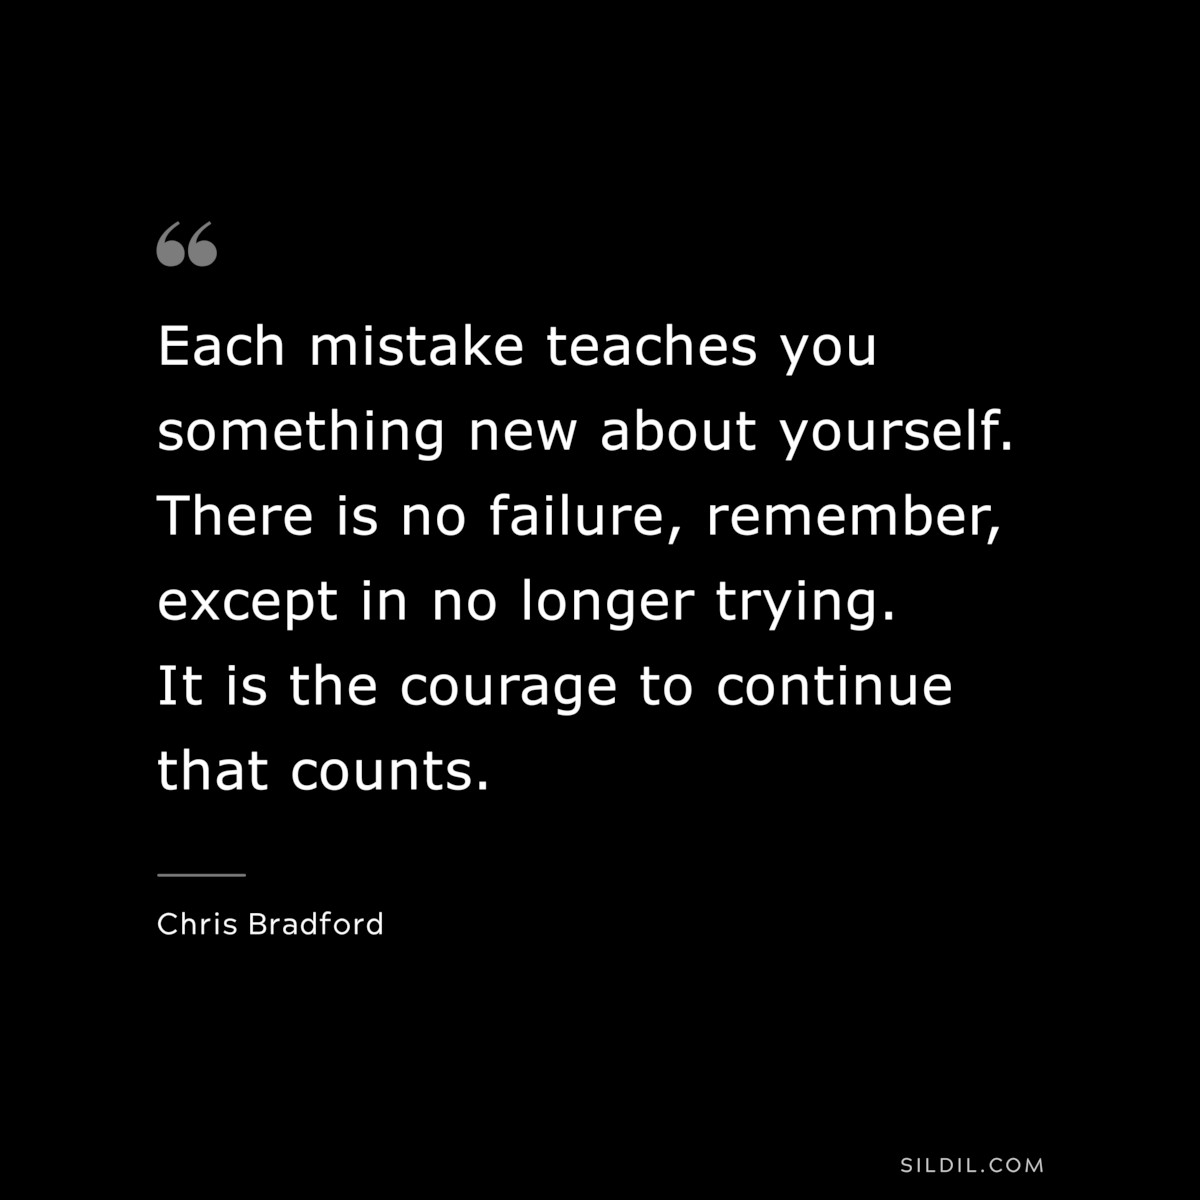 Each mistake teaches you something new about yourself. There is no failure, remember, except in no longer trying. It is the courage to continue that counts. ― Chris Bradford